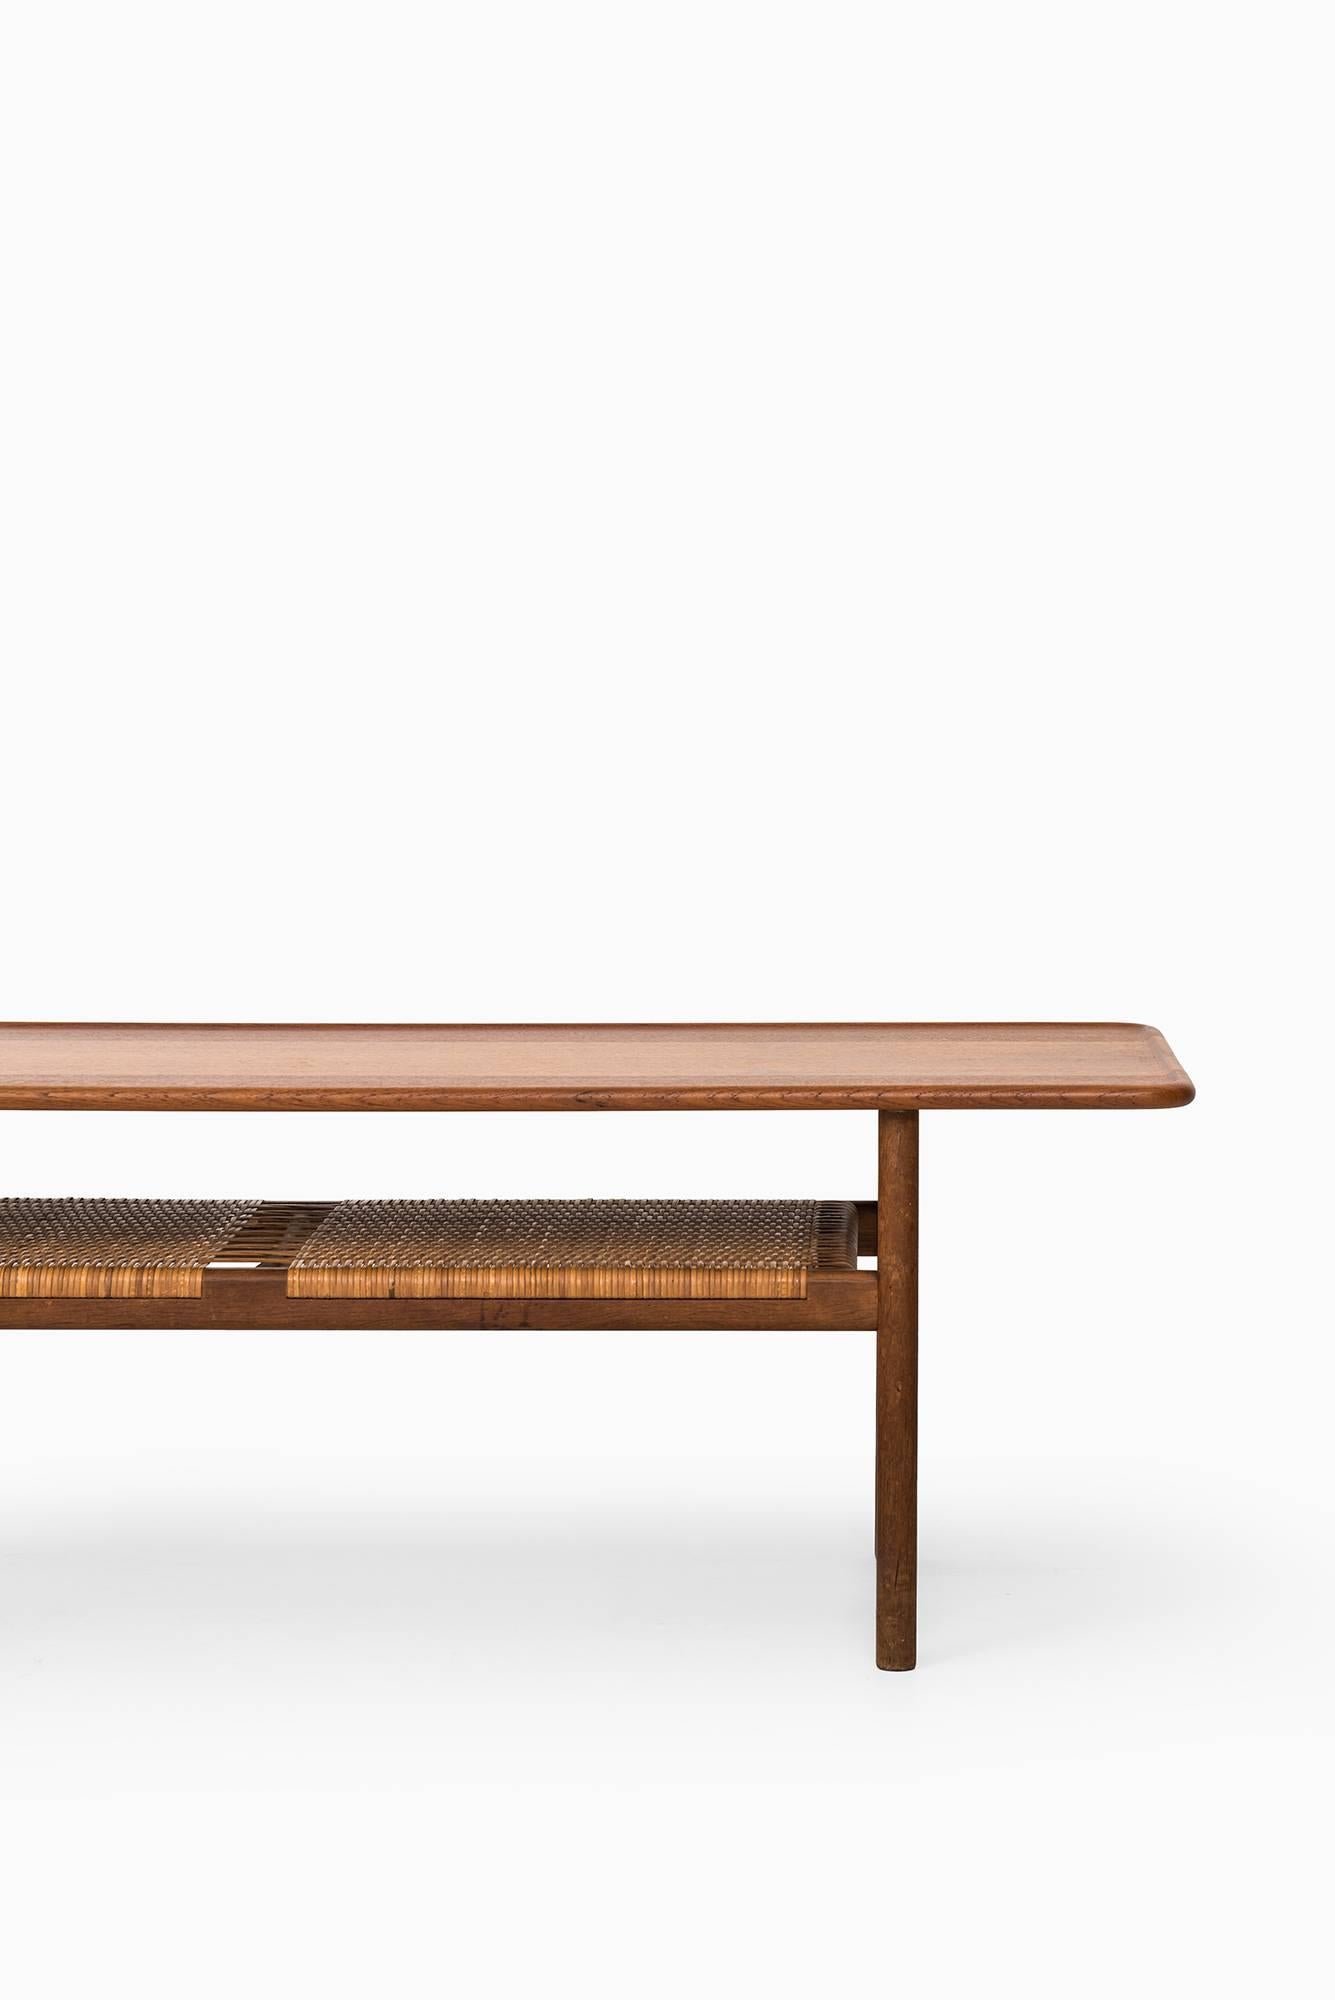 Coffee table model AT-10 designed by Hans Wegner. Produced by Andreas Tuck in Denmark.